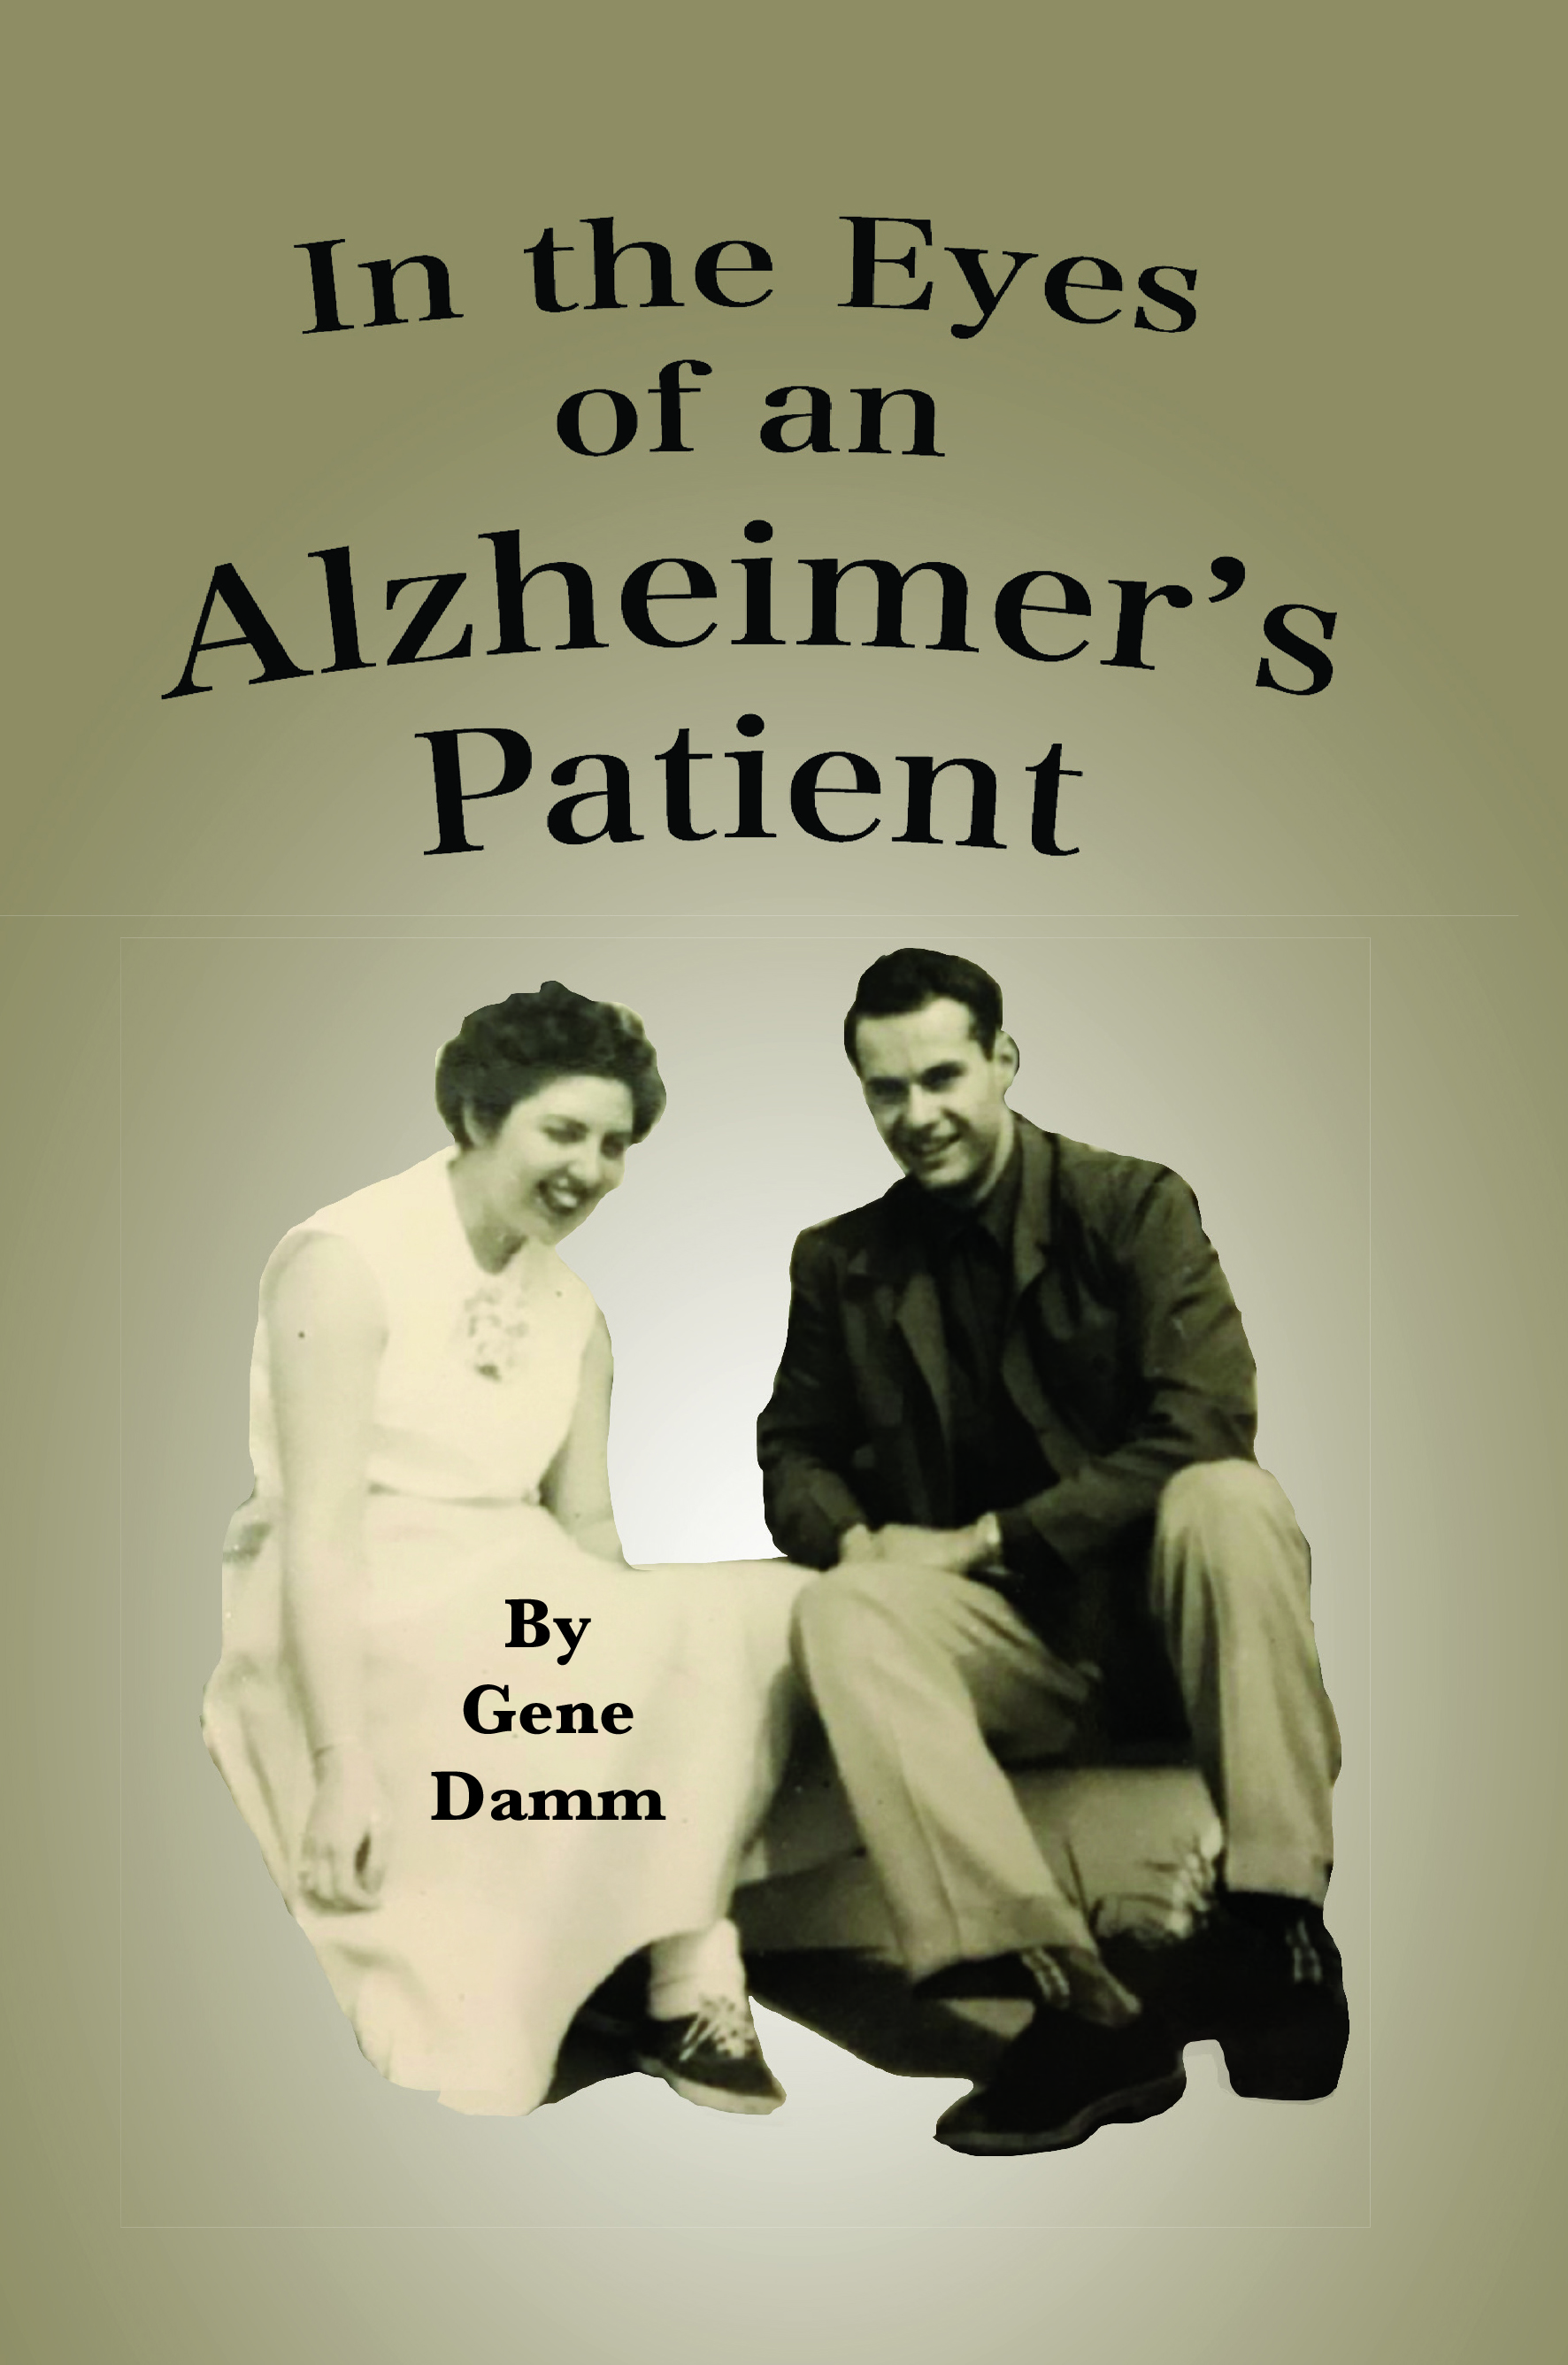 In the Eyes of an Alzheimer's Patient by Gene Damm